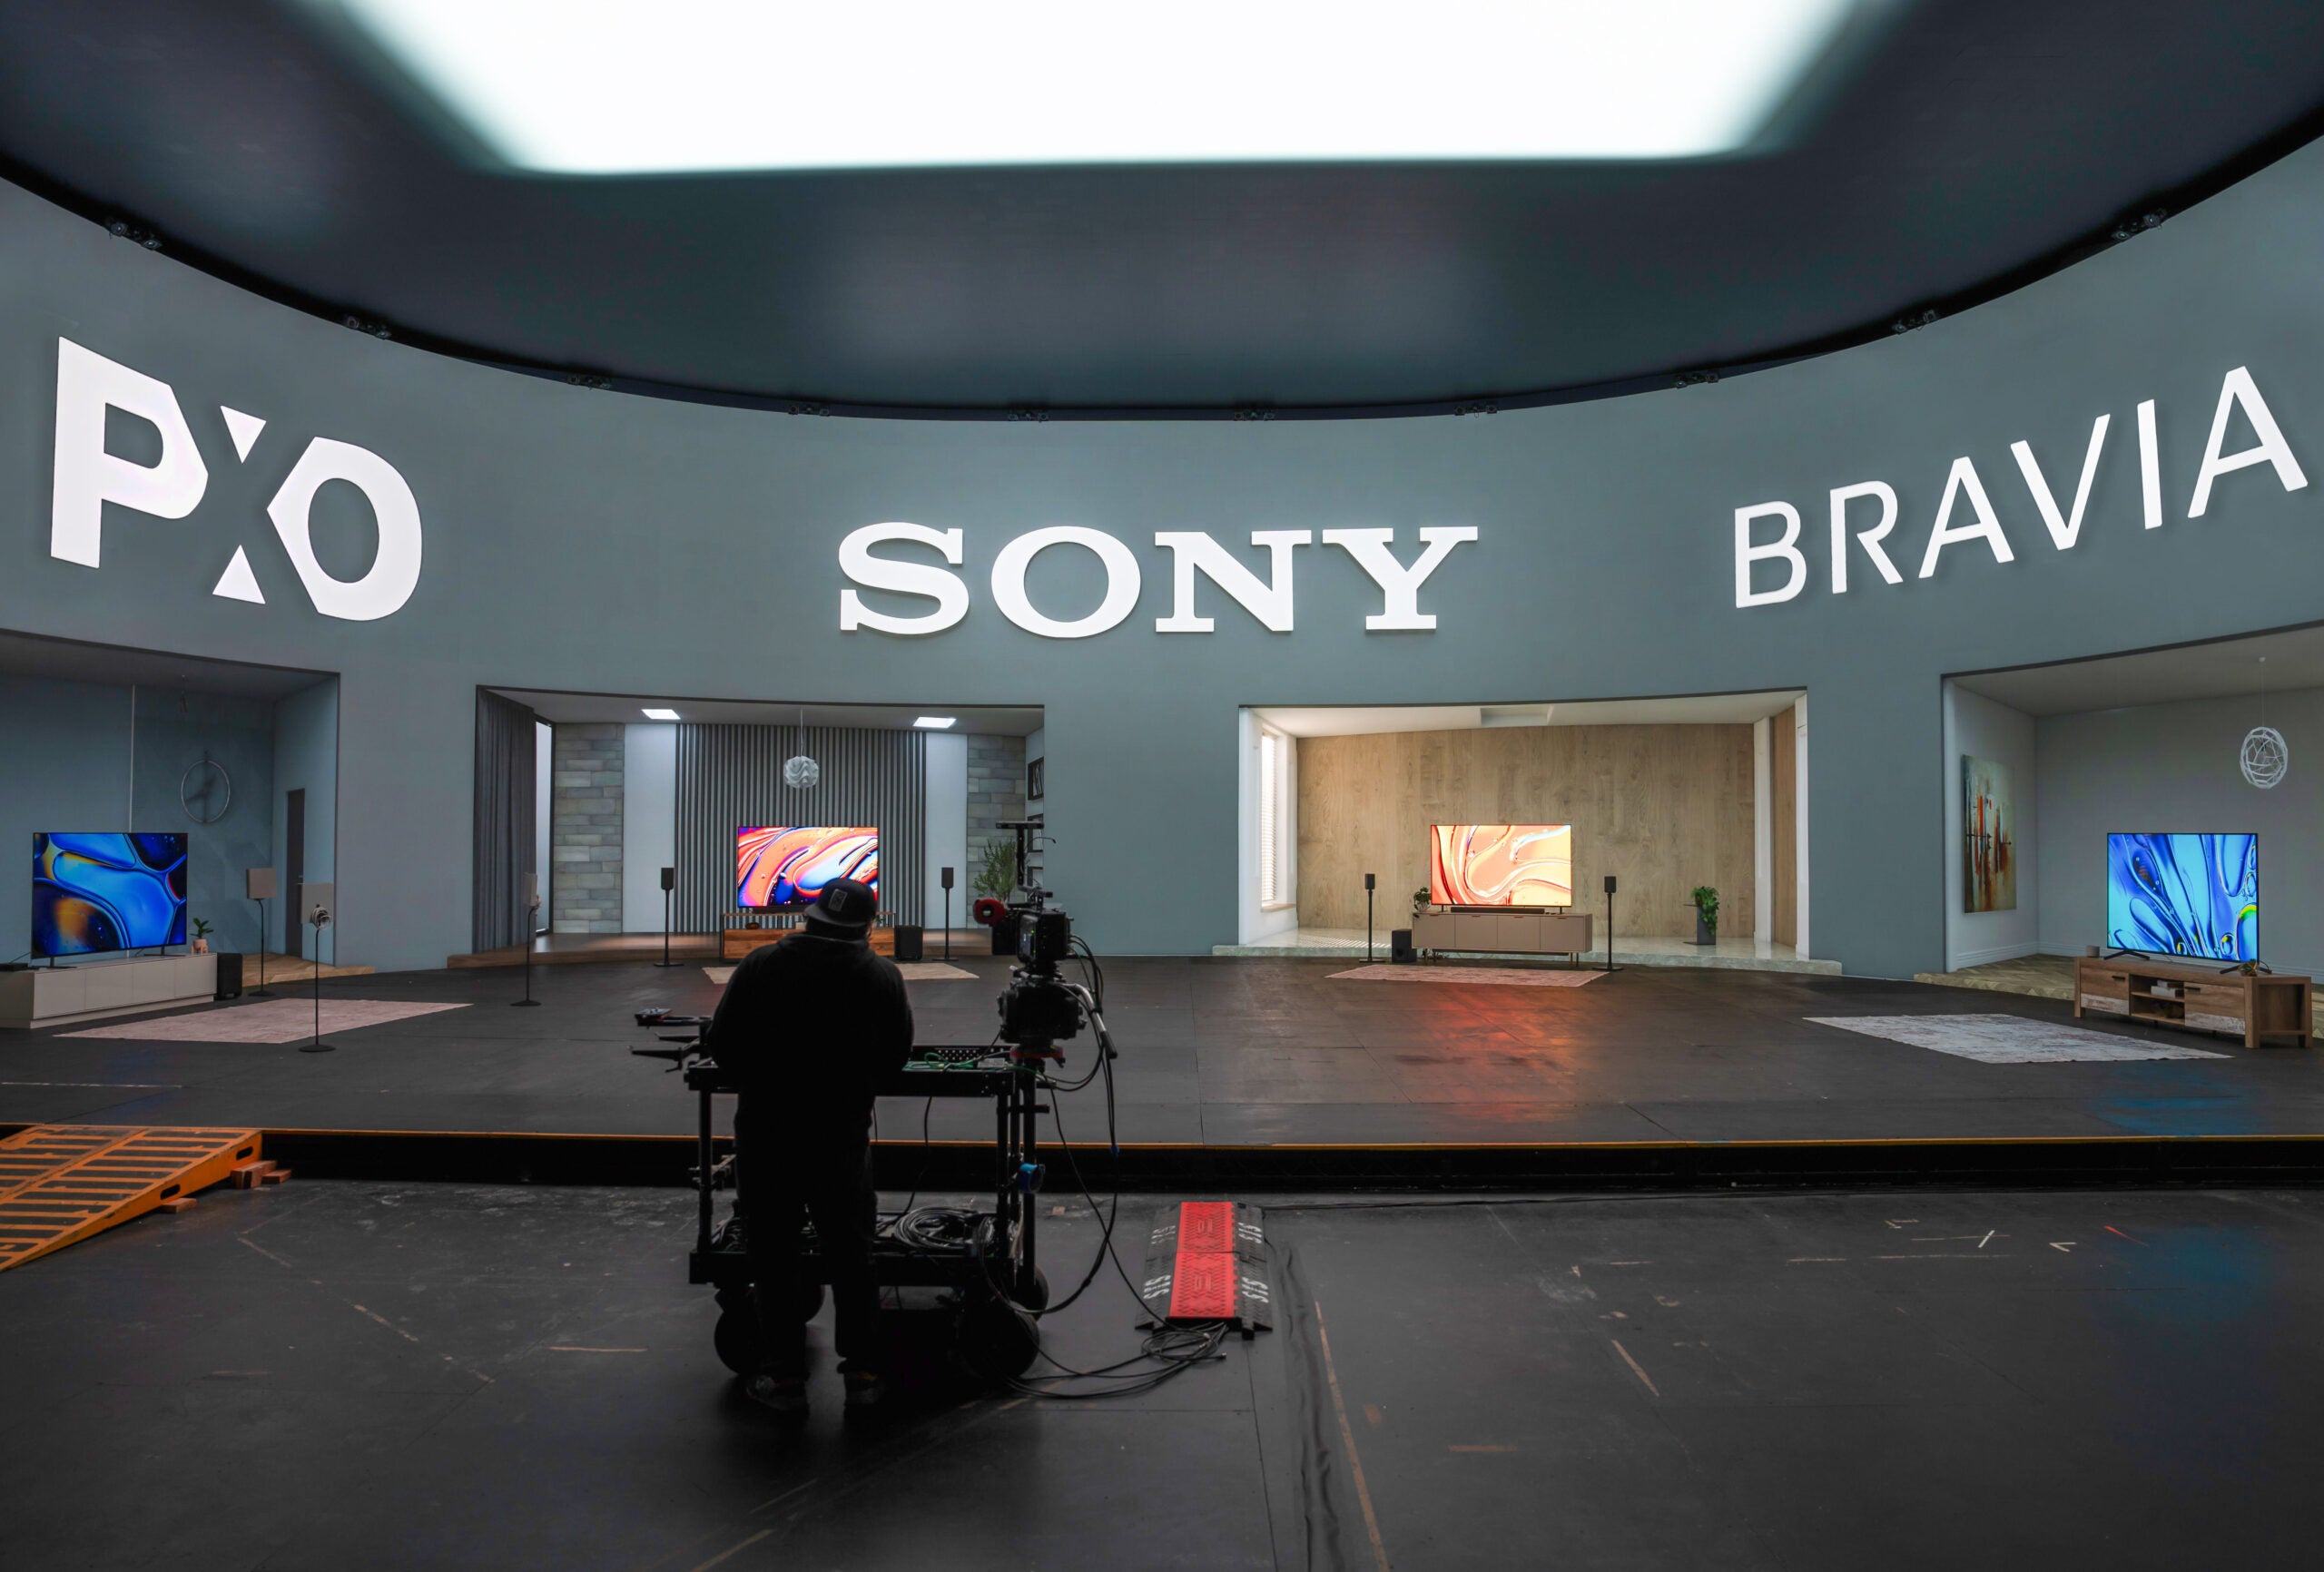 Sony's new televisions staged in a large indoor room.